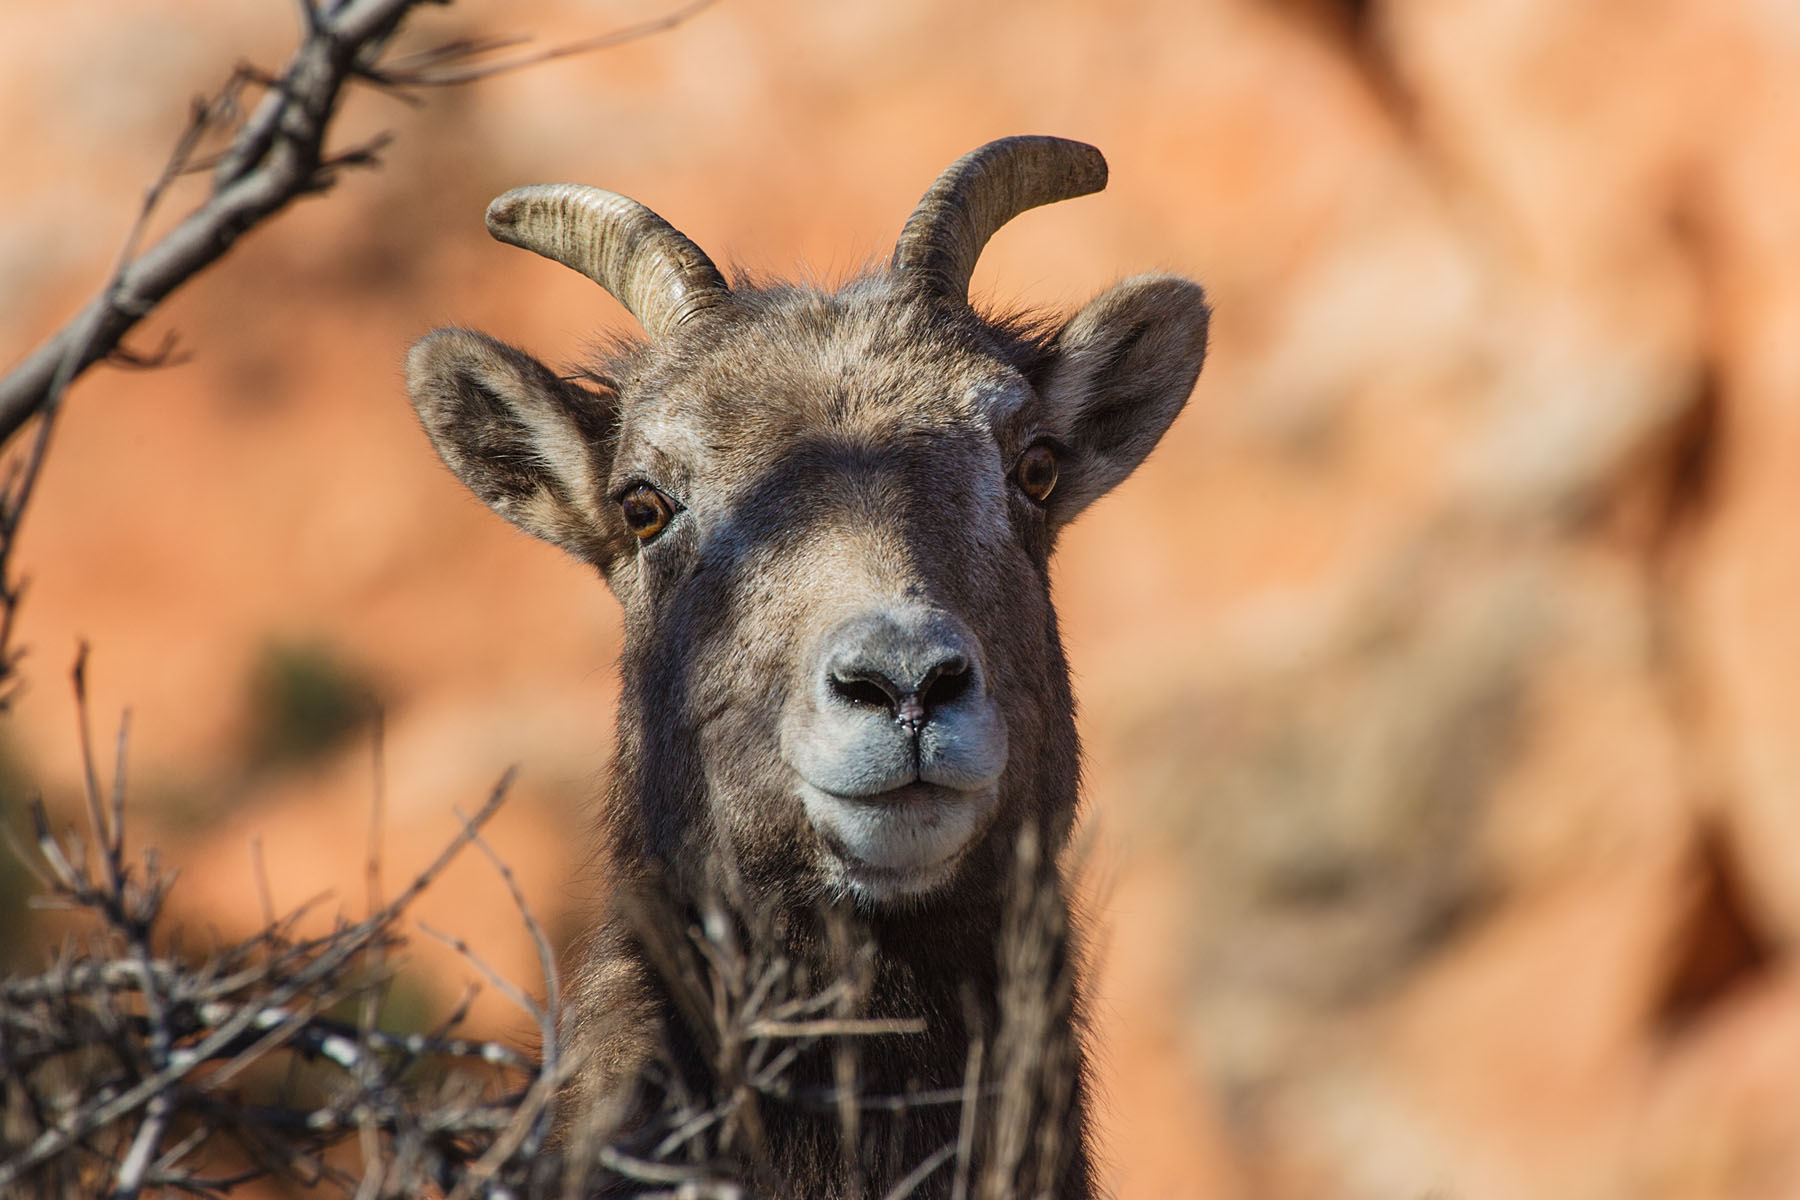 Bighorn ewe peers down from a resting spot, Cleghorn Canyon, Rapid City, SD.  Click for next photo.